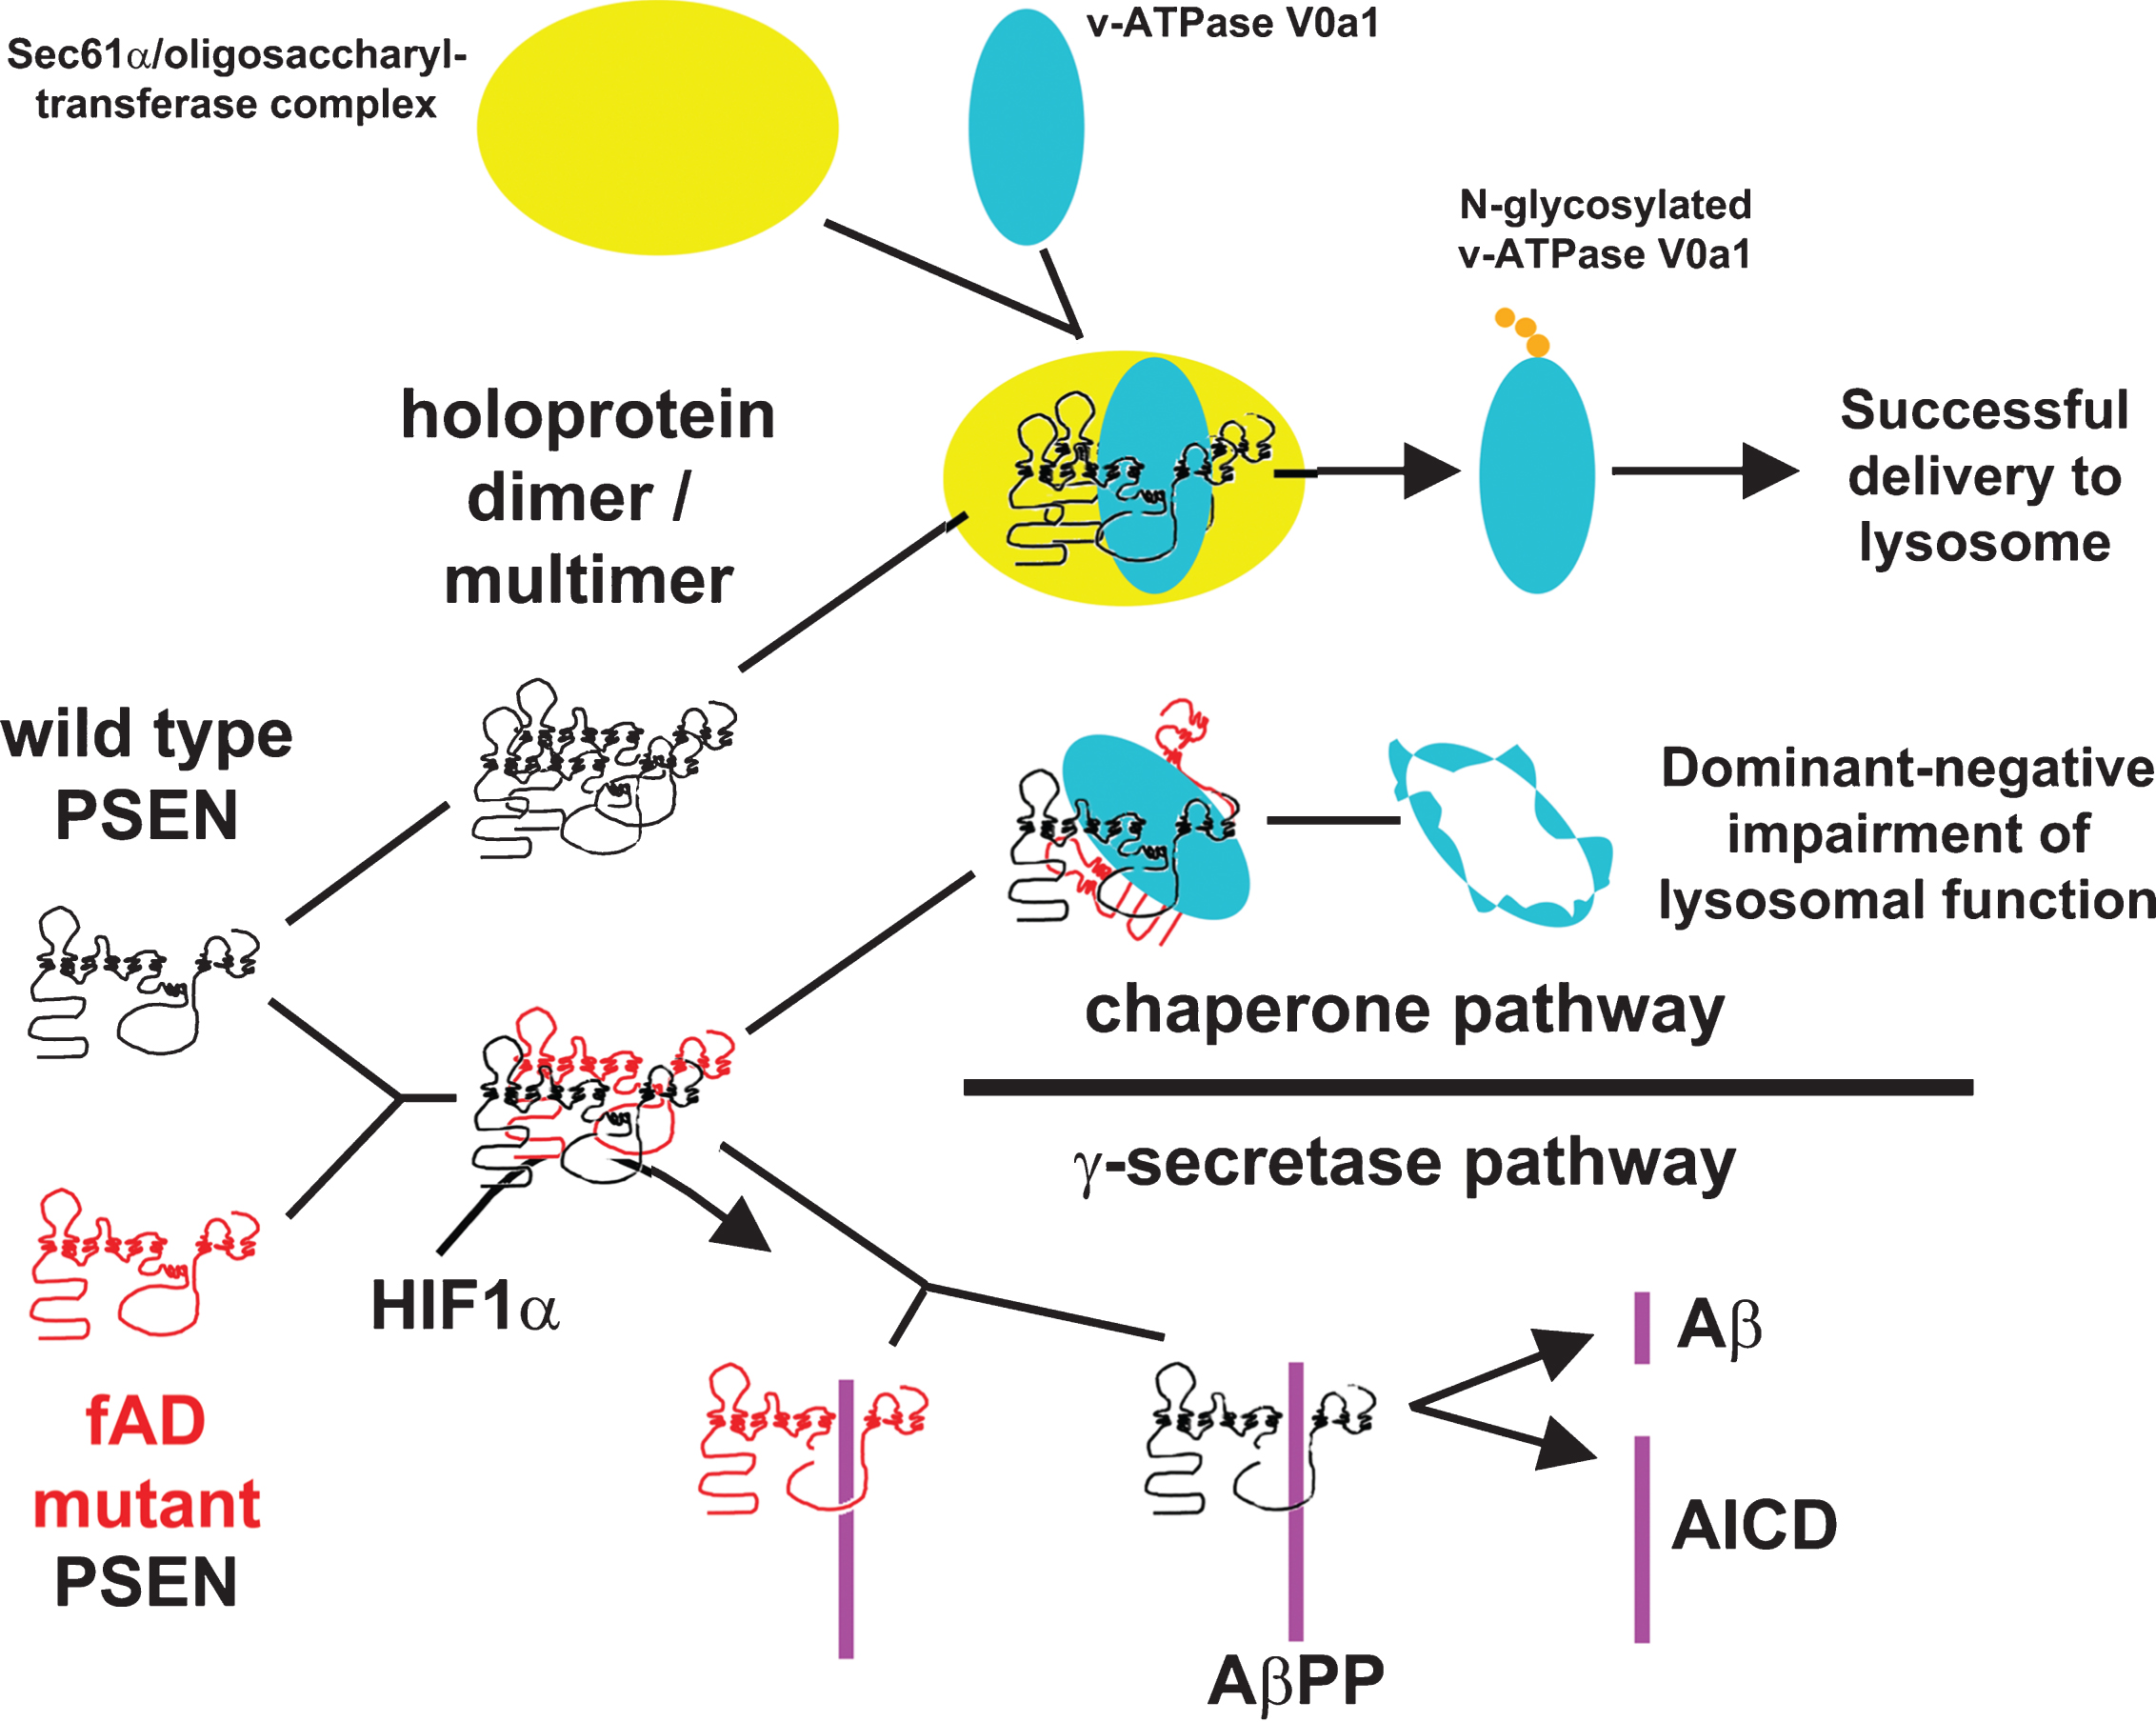 Hypothetical model of action of PSEN1 holoprotein including multimerization and a possible interaction with HIF1α. PSEN holoproteins can form multimers and these multimers may be necessary for the endoproteolysis that activates γ-secretase activity. Mutations that preserve the open reading frames of PSENs may allow mutant holoproteins to bind to wild type holoproteins and inhibit holoprotein-dependent activities that are critical to cellular homeostasis in ageing brains. Under hypoxic conditions HIF1α may normally interact with multimeric holoprotein complexes to stimulate formation of active γ-secretase. Normal lysosome acidification may be required for correct metabolism and/or secretion of AβPP, AICD and Aβ.